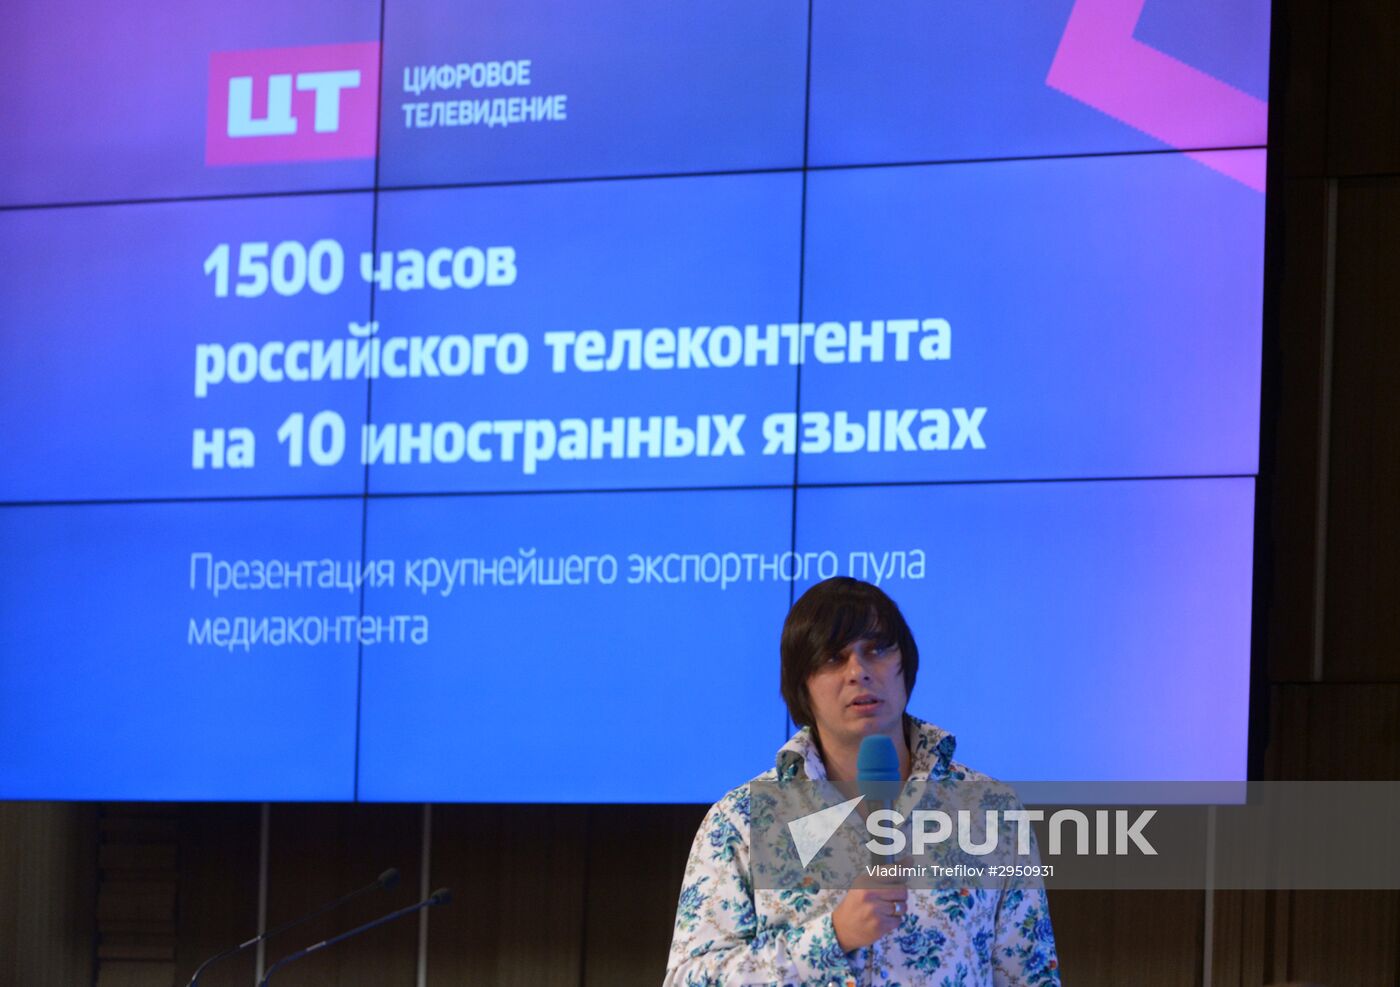 News conference on promoting Russia's media content abroad